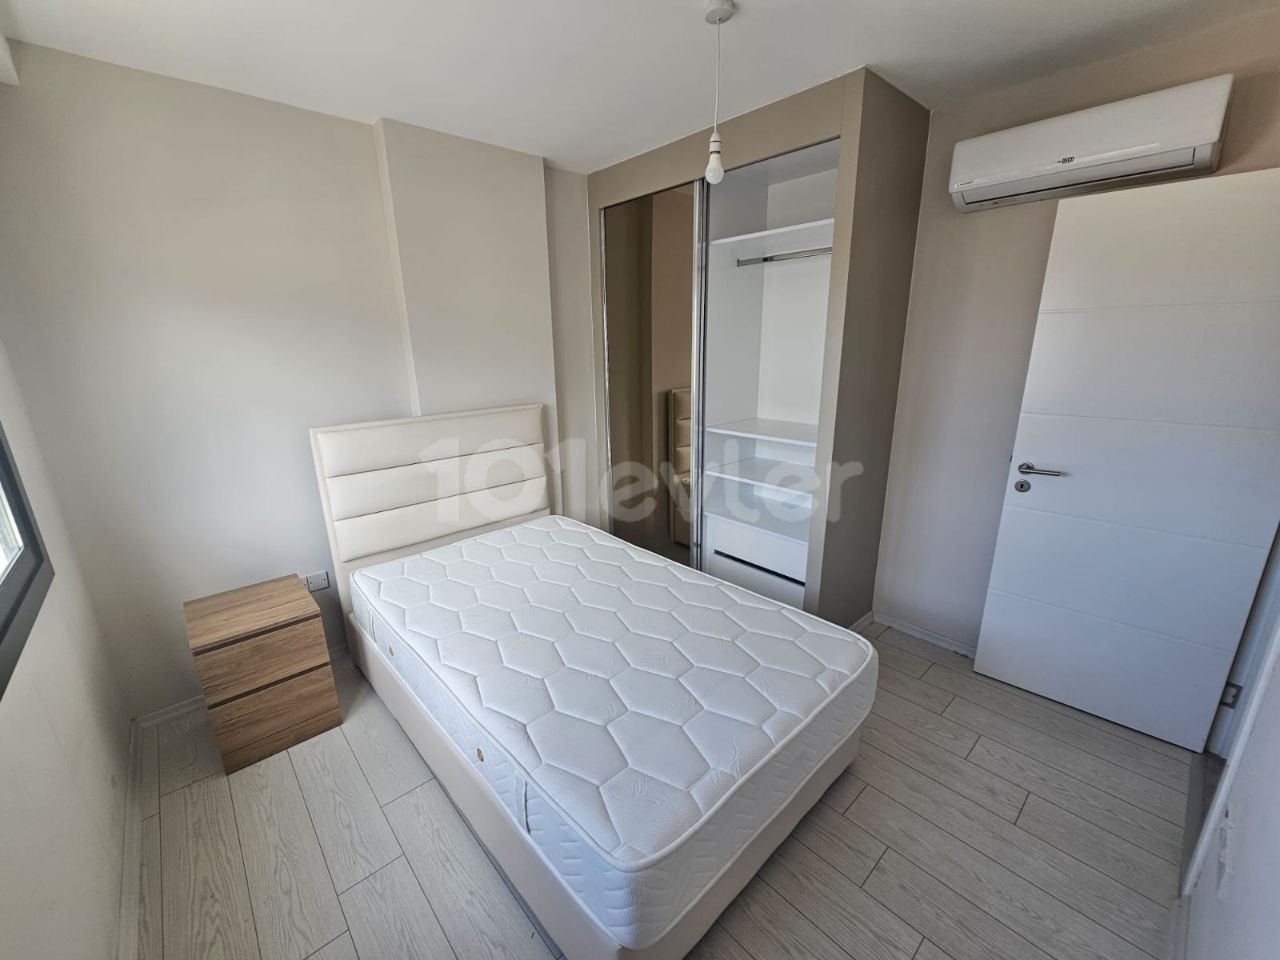 NEW 2+1 FLAT FOR RENT ON THE STREET AROUND NUSMAR MARKET!